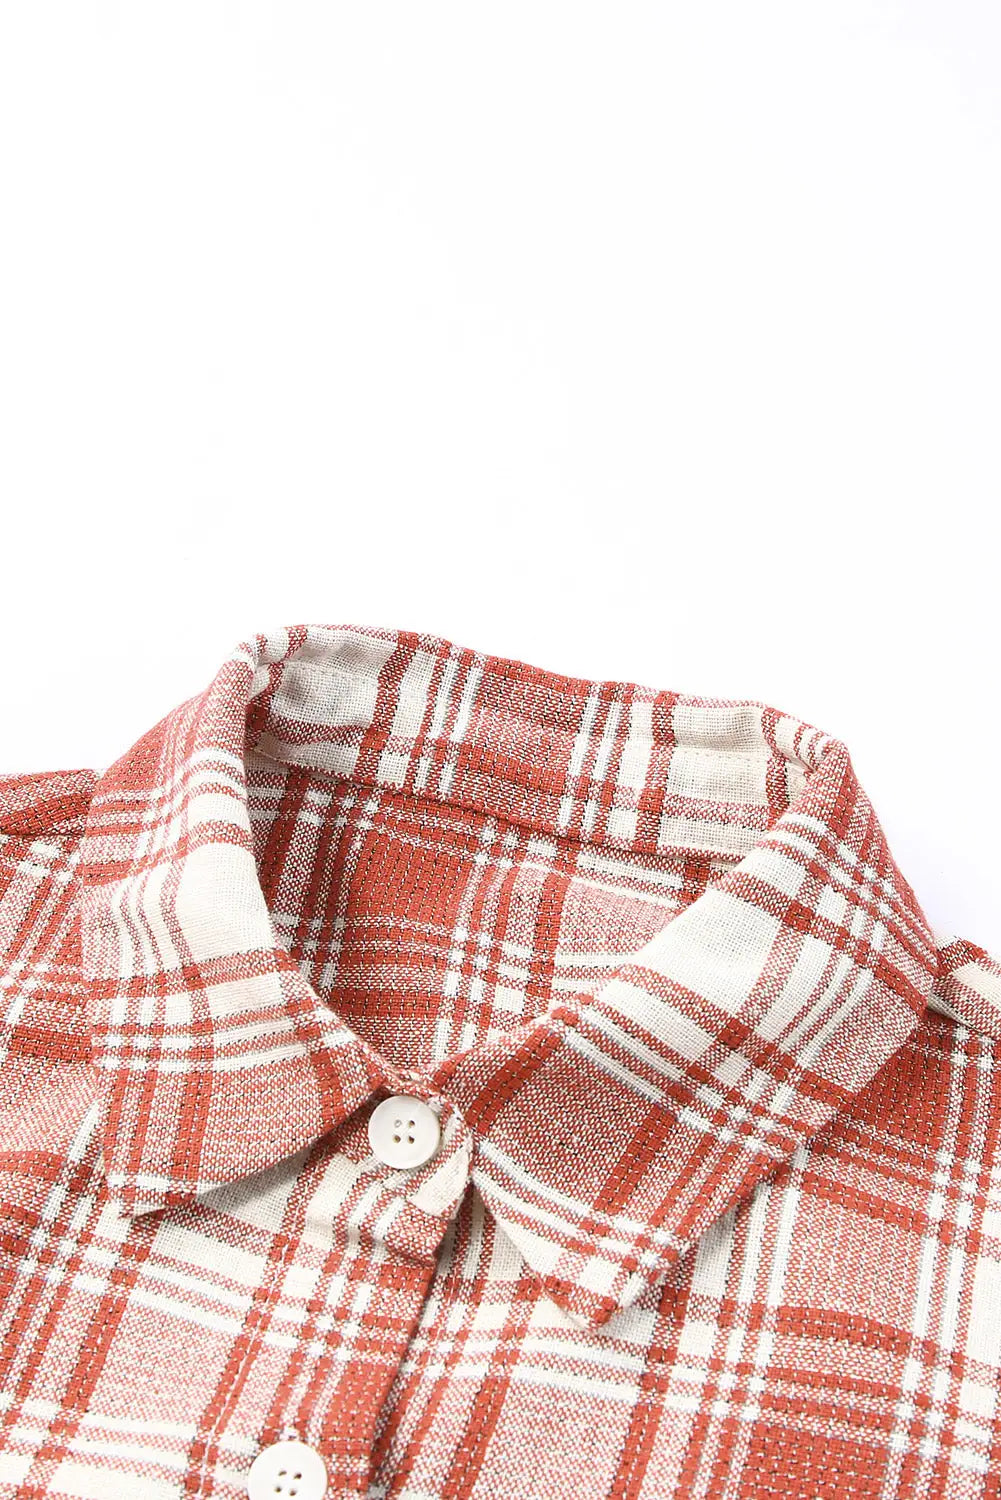 Red plaid print button long shacket - outerwear